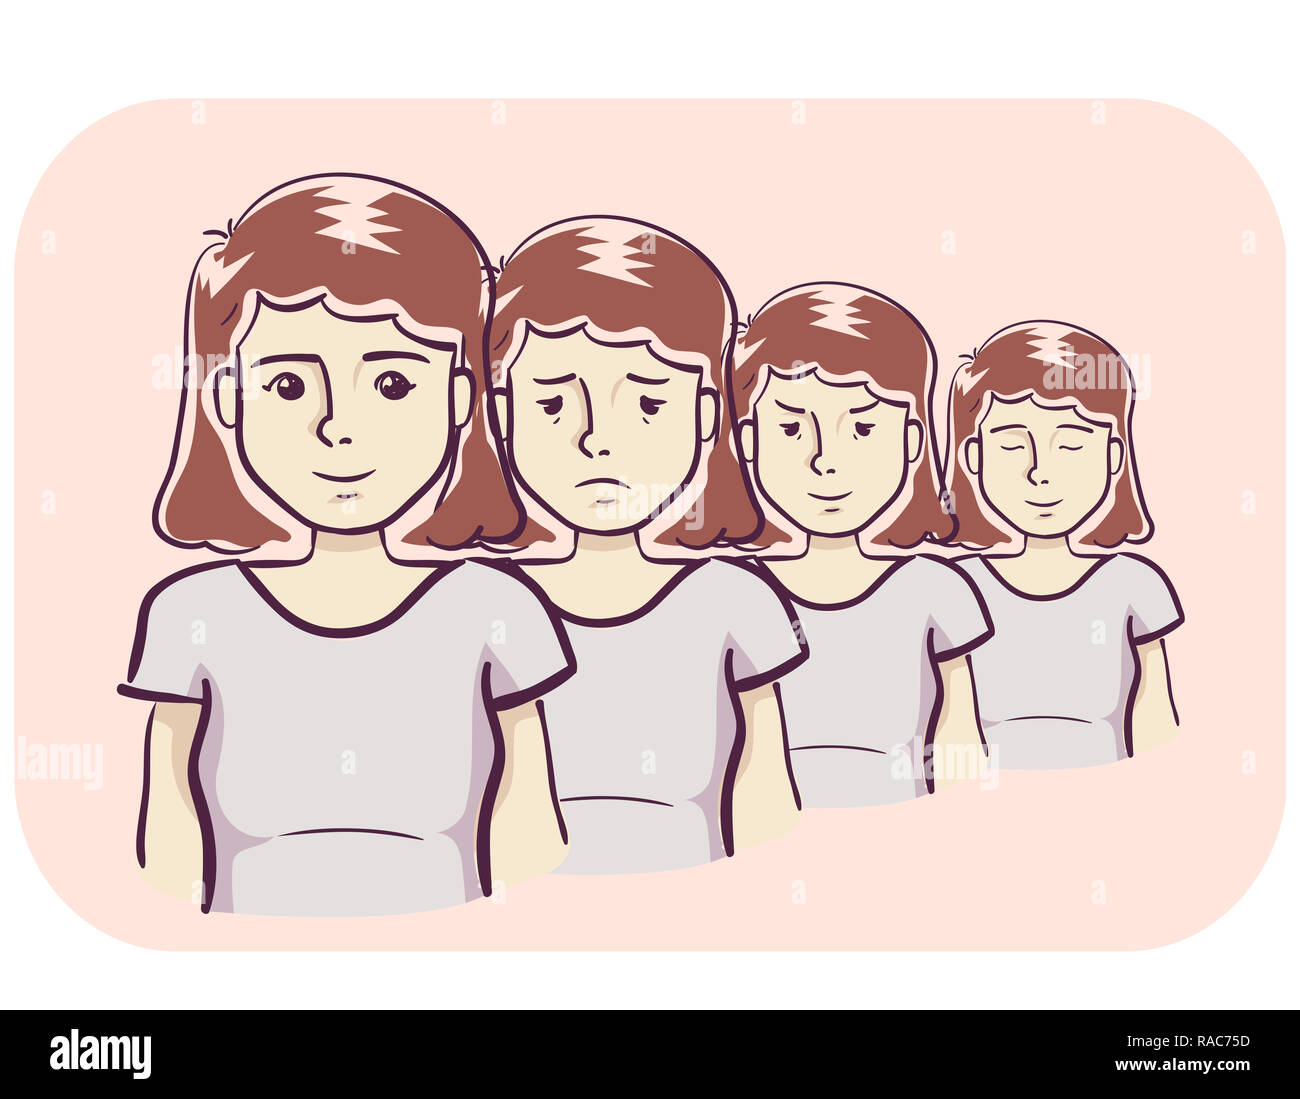 Illustration of a Teenage Girl Showing Different Mood Swings Stock Photo